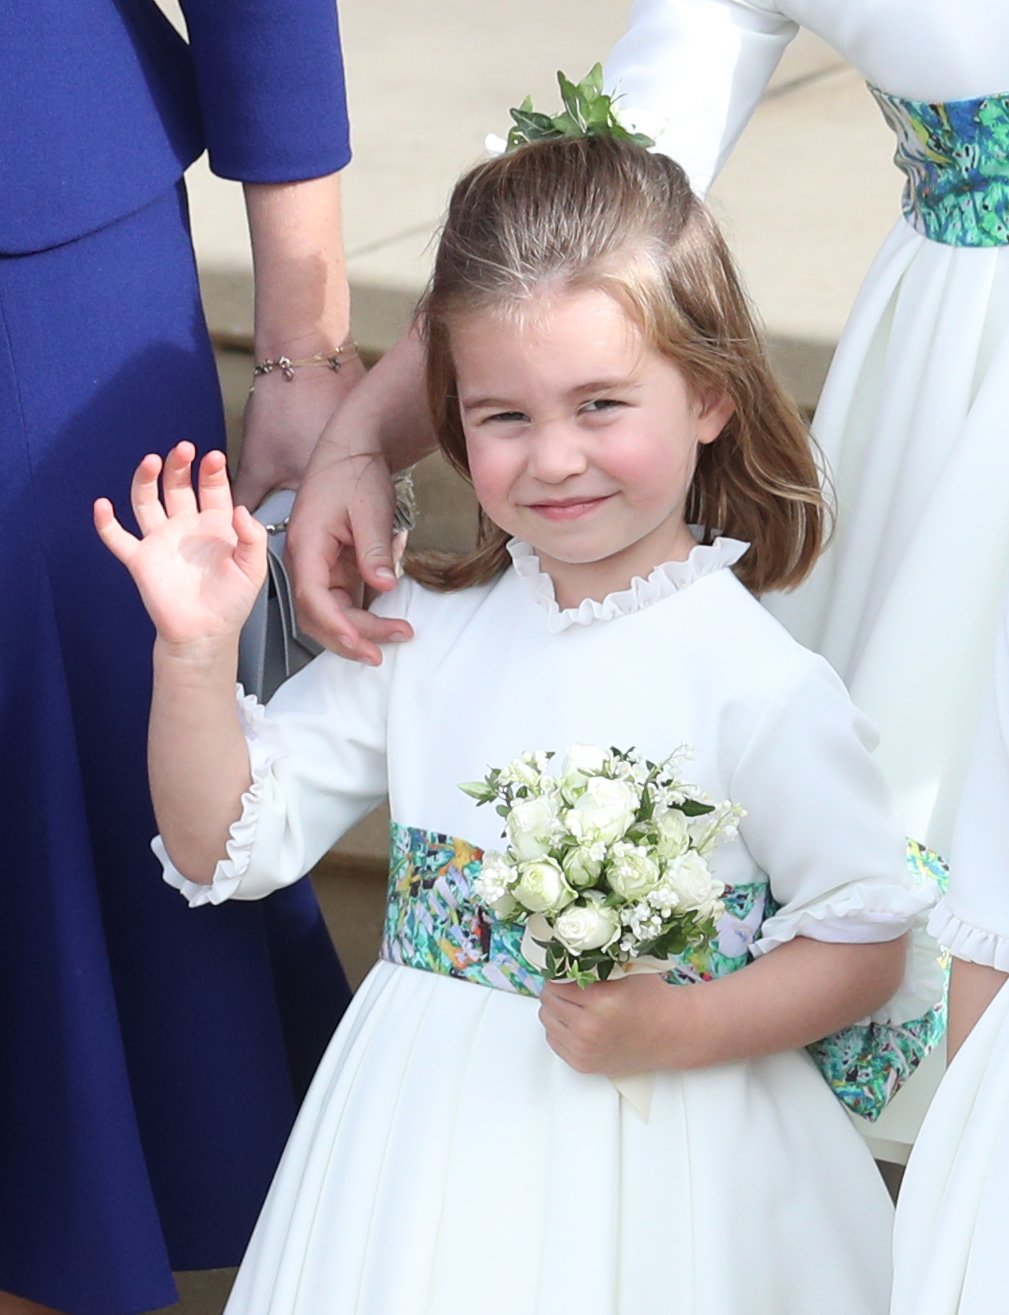 Princess Charlotte waves to cameras at Princess Eugenie's wedding at St. George's Chapel in Windsor Castle, Windsor, England on October 12, 2018 | Photo: Getty Images